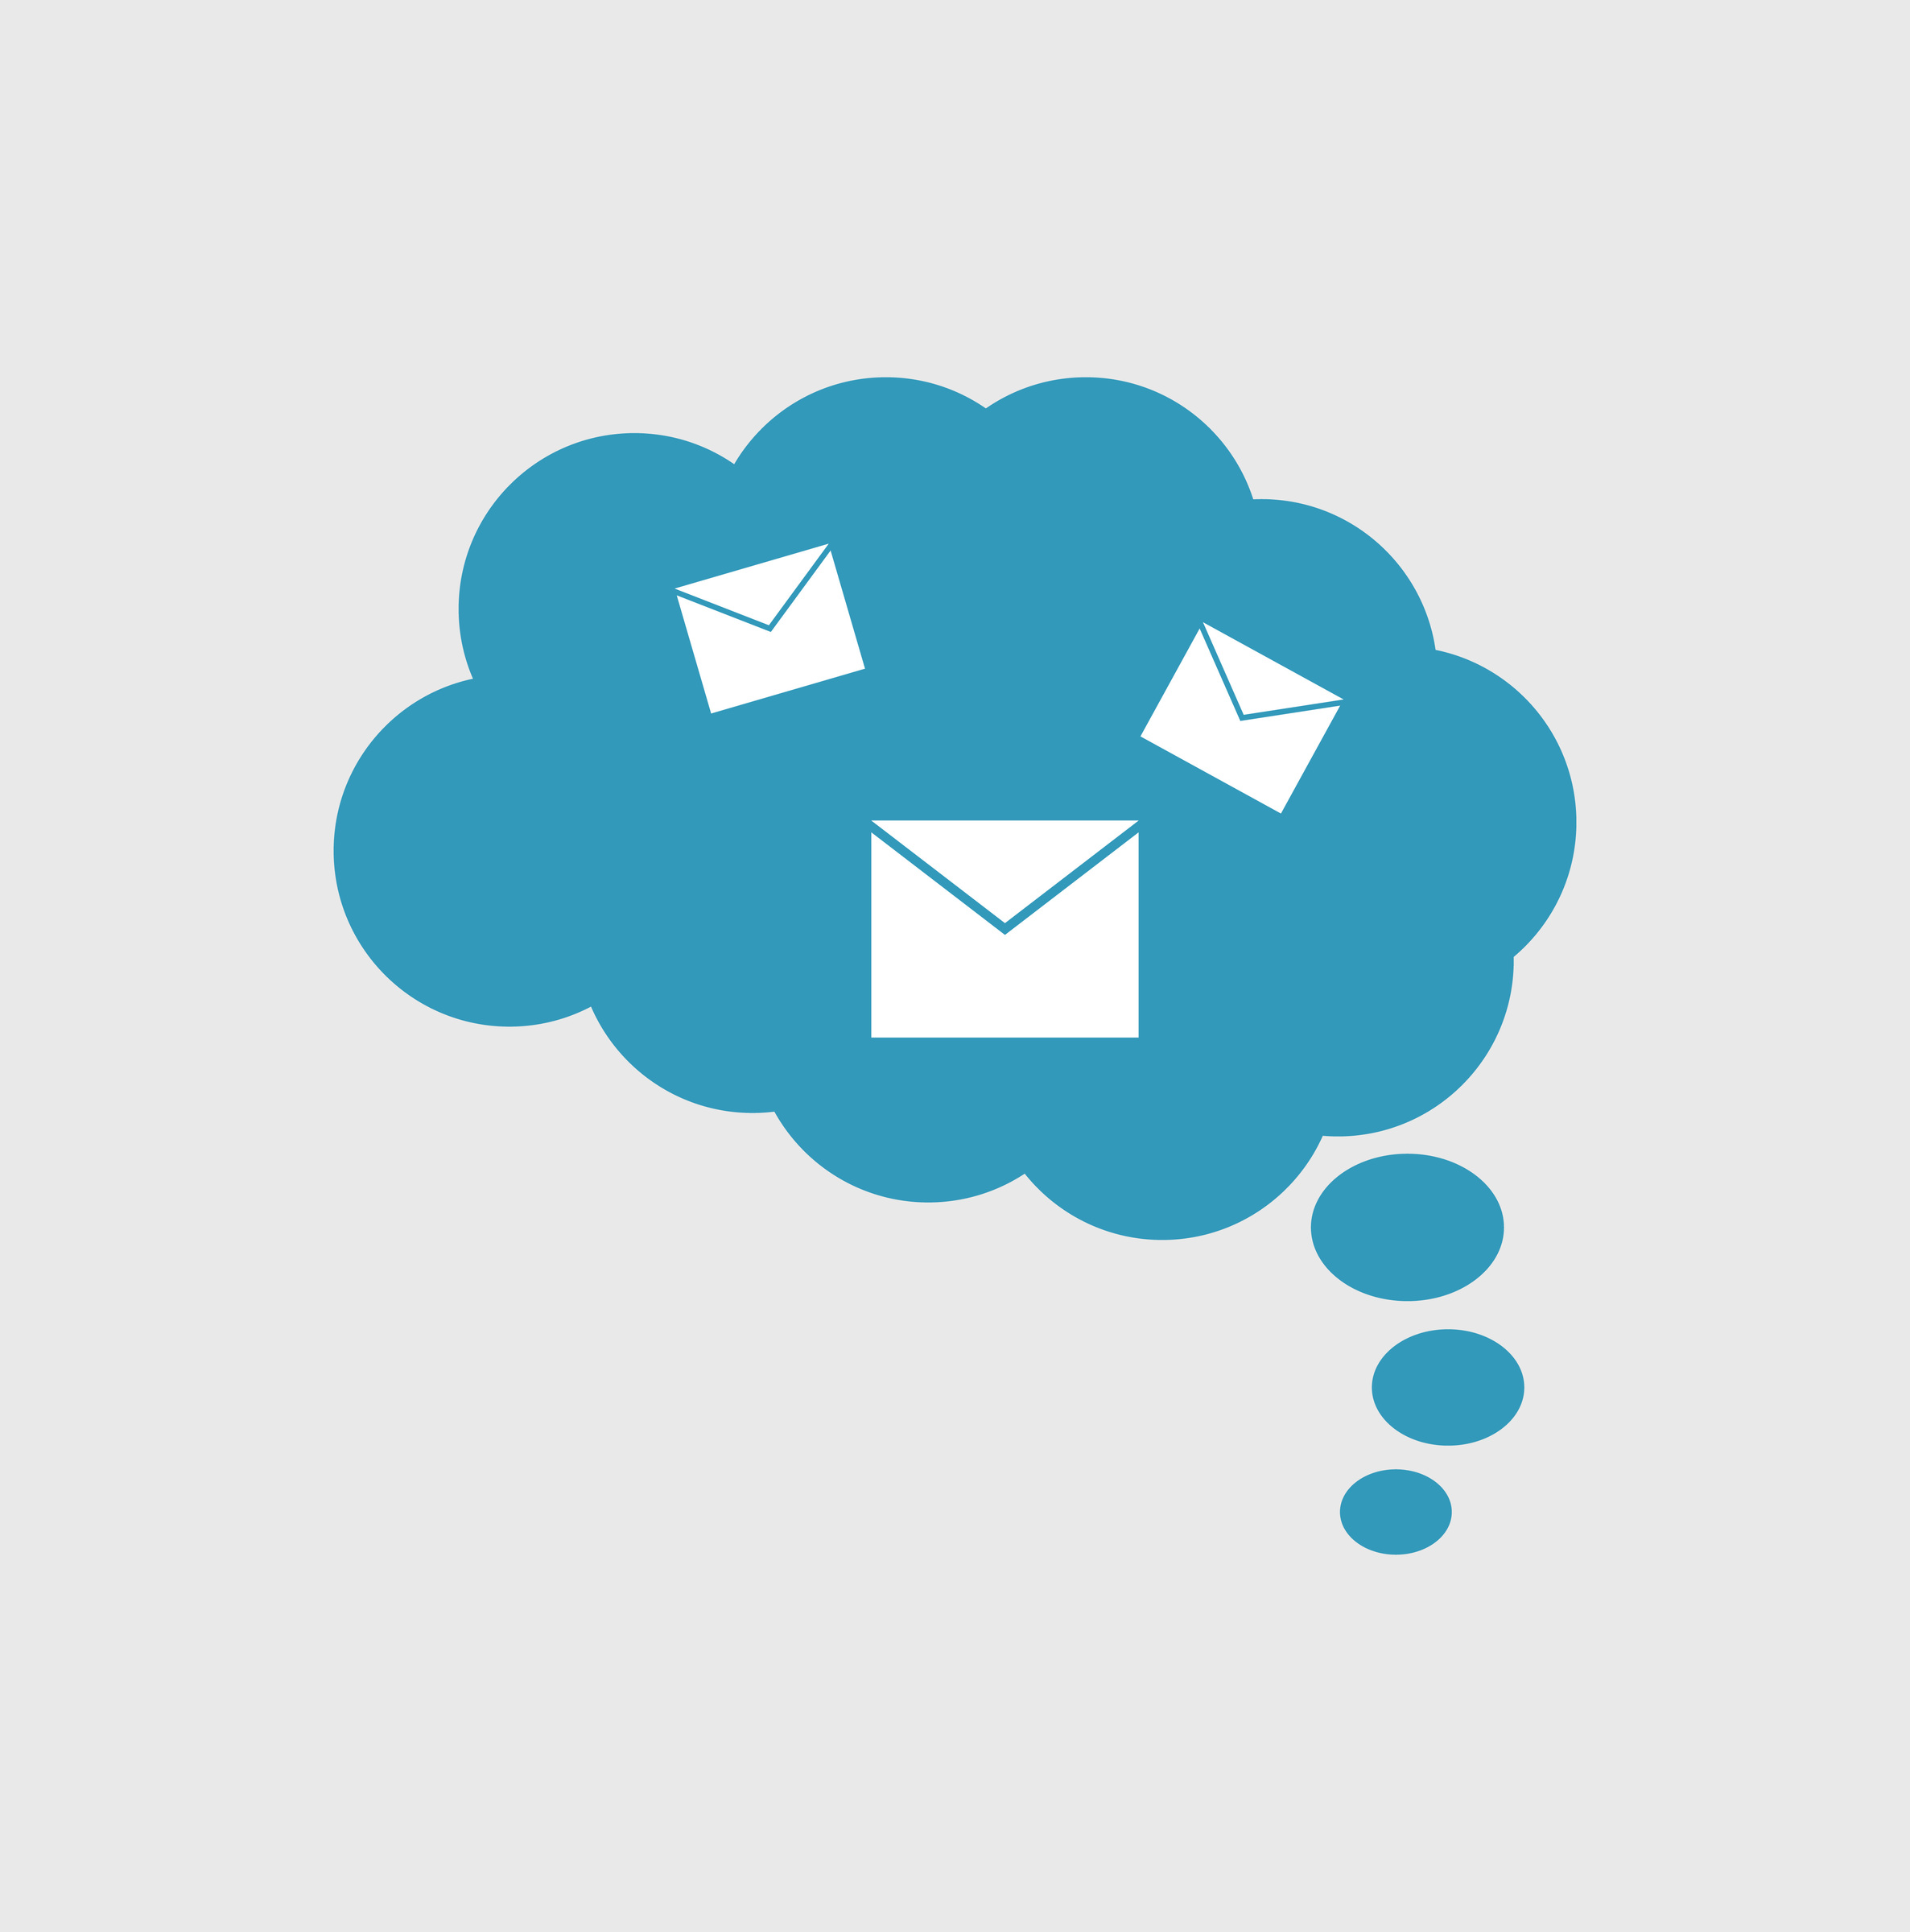 Email-Subject Lines